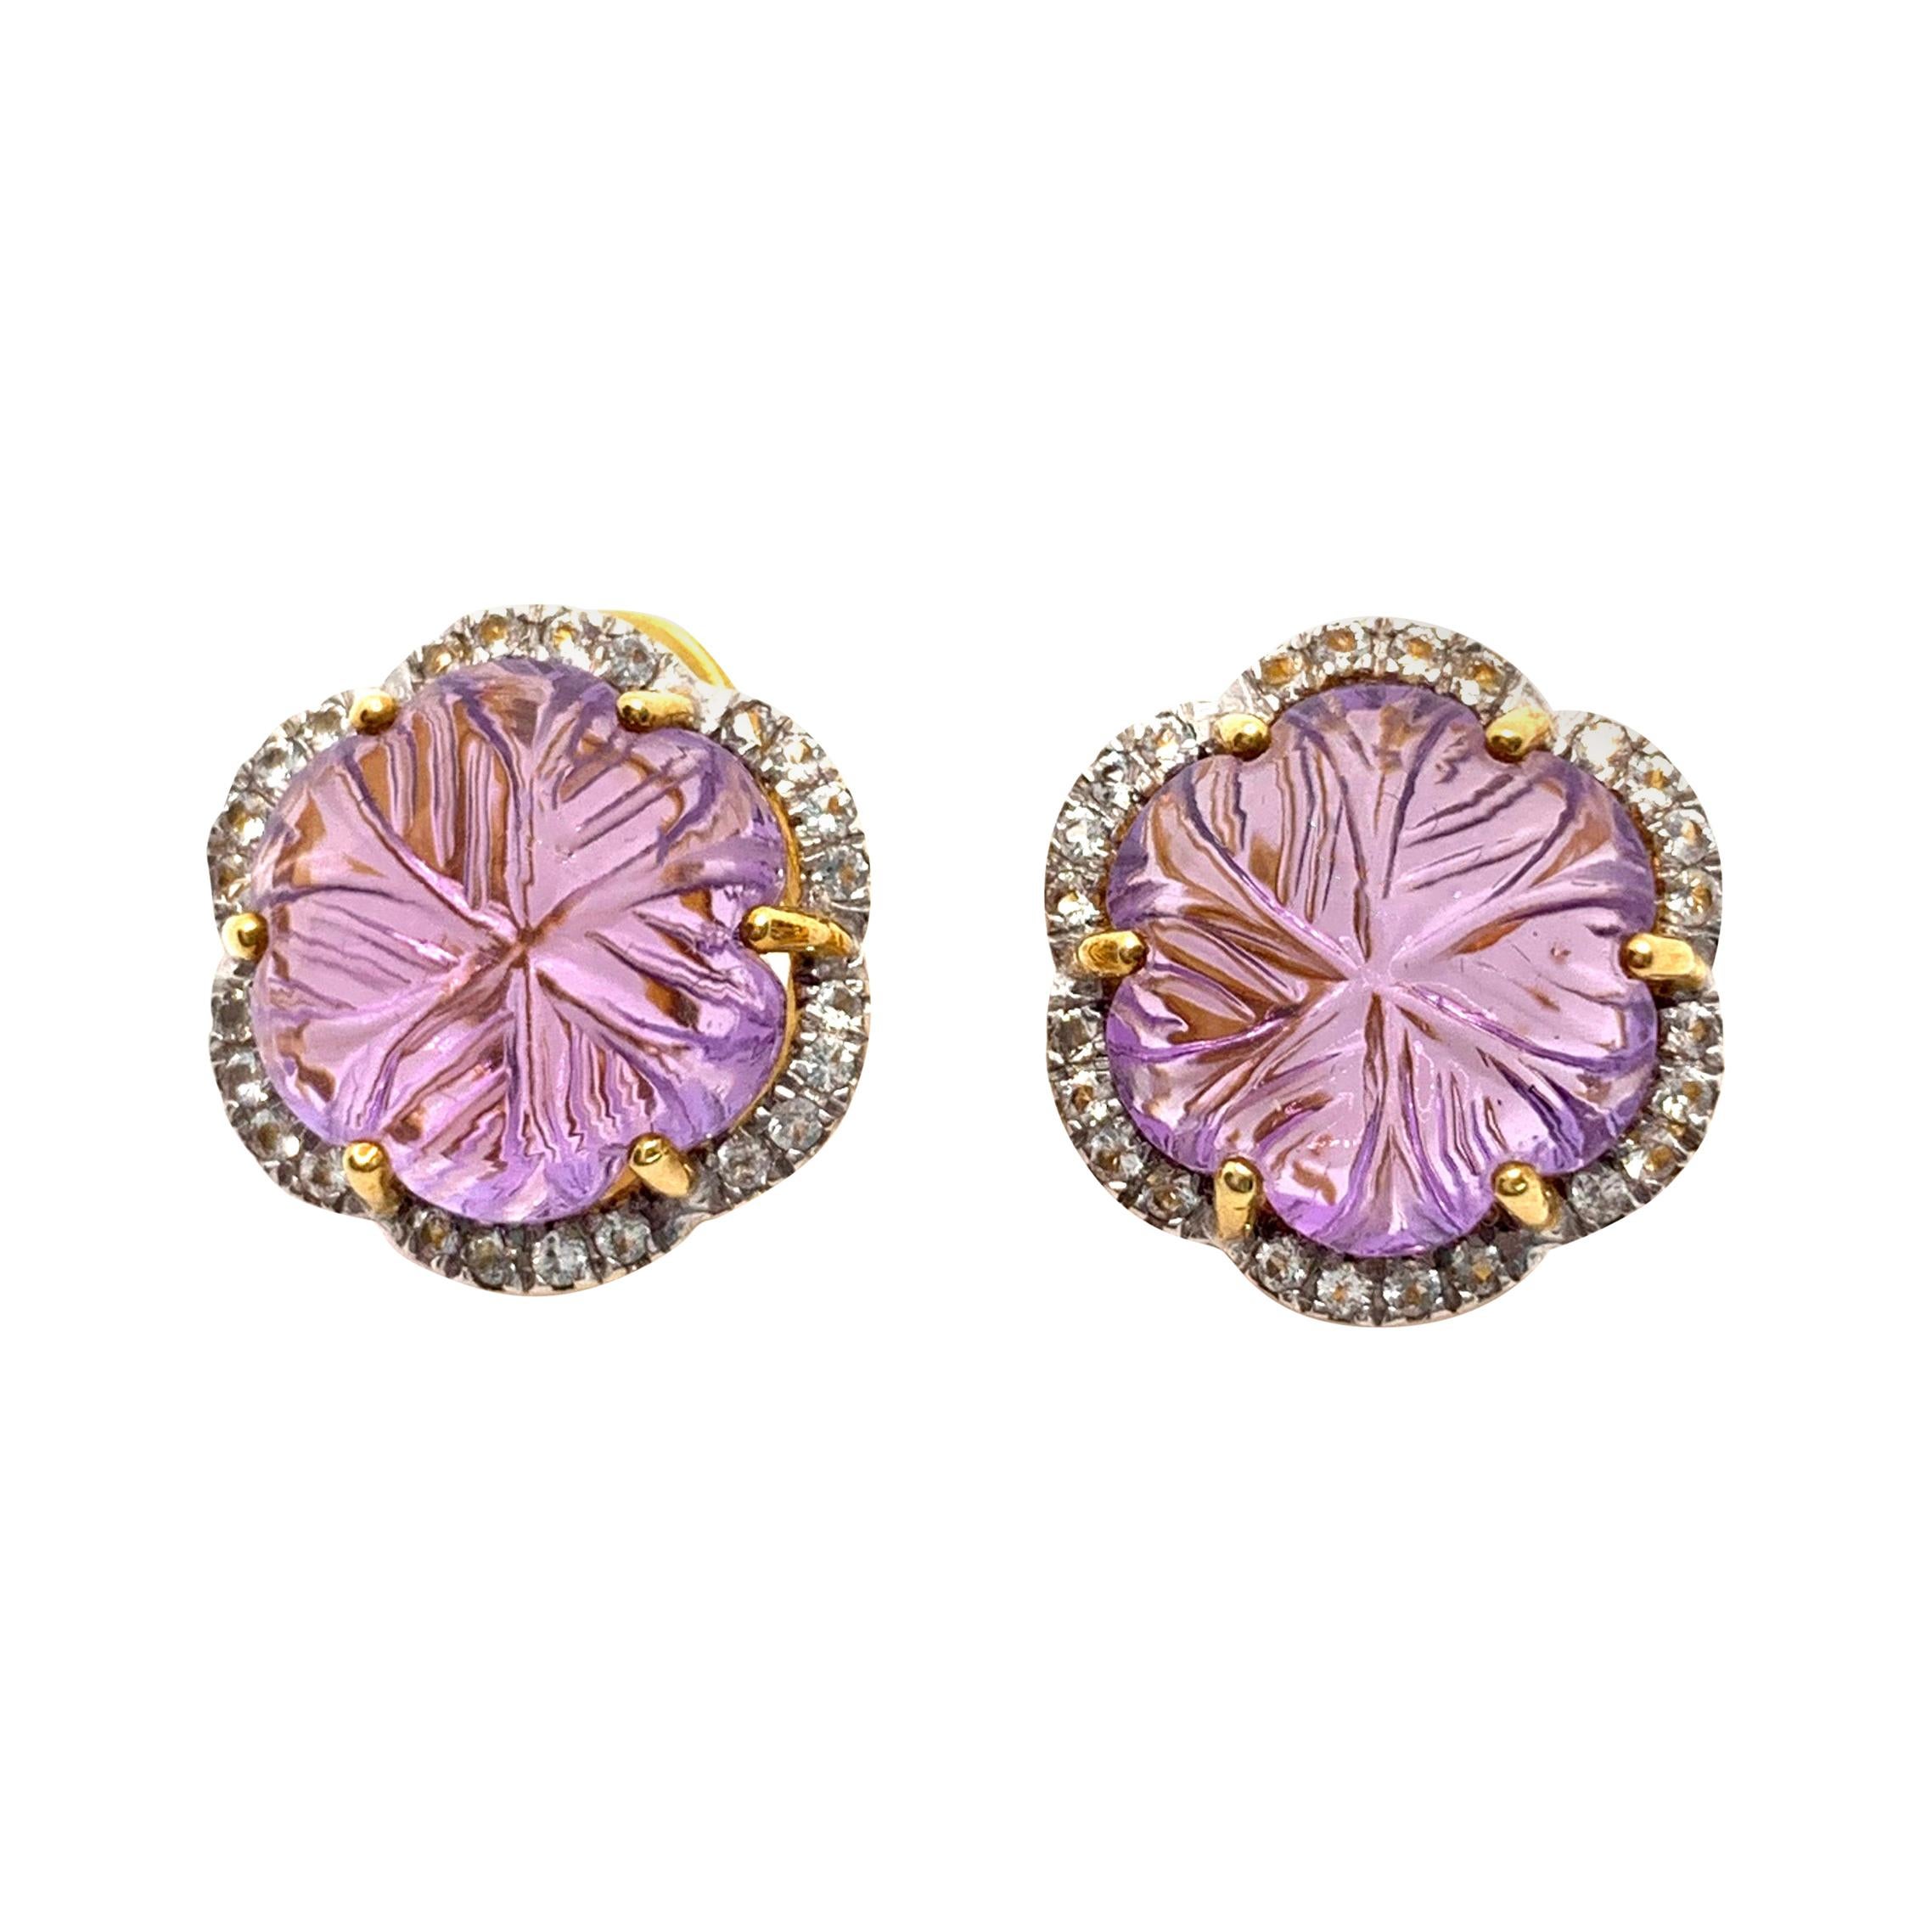 Elegant Carved Cabochon Amethyst Flower Button Earrings For Sale